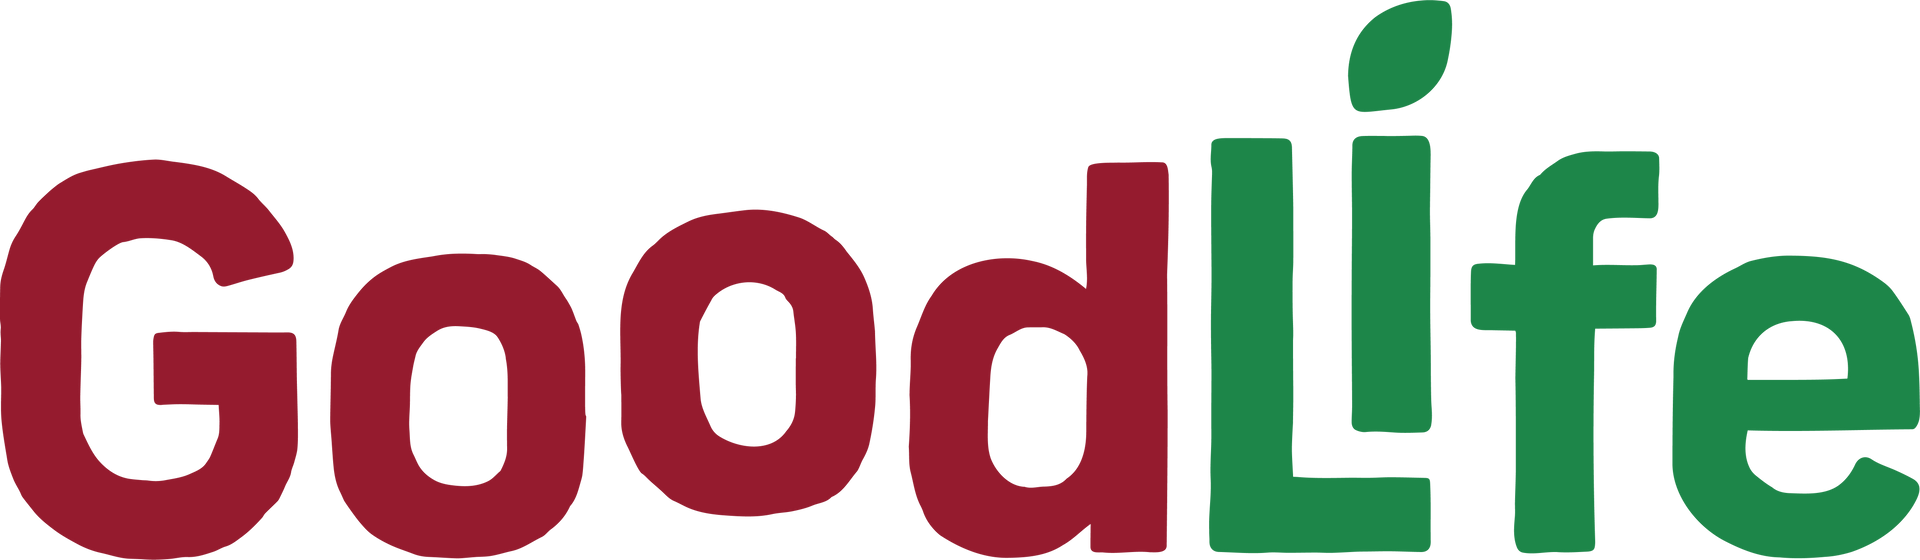 Good Life Logo - meat free based meals and recipes